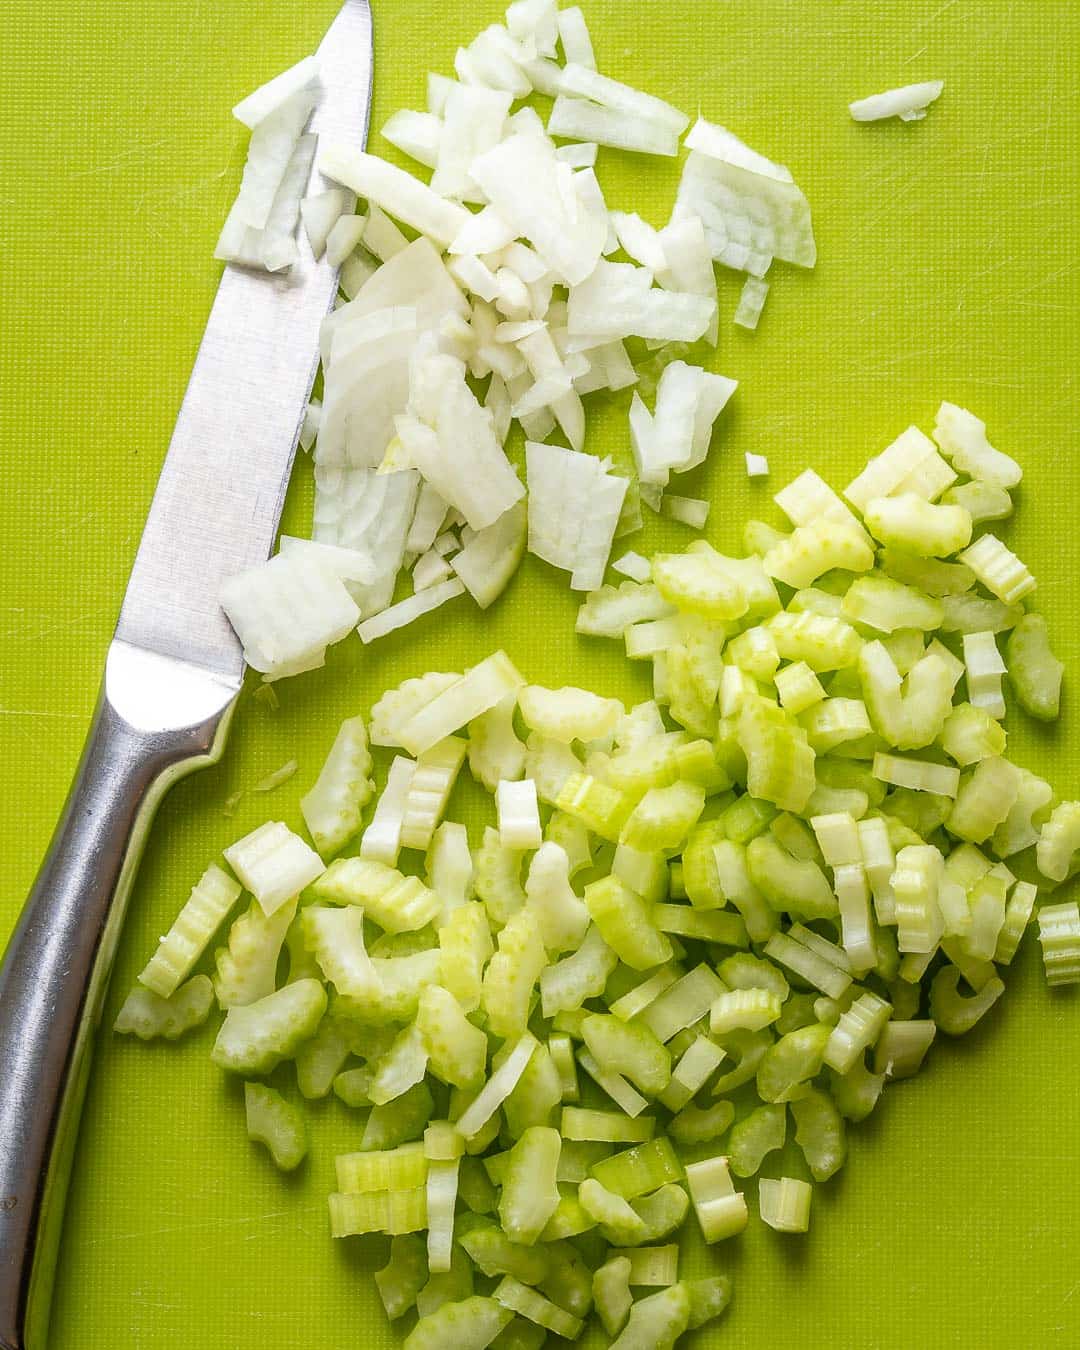 chopping celery with knife on cutting boardMex